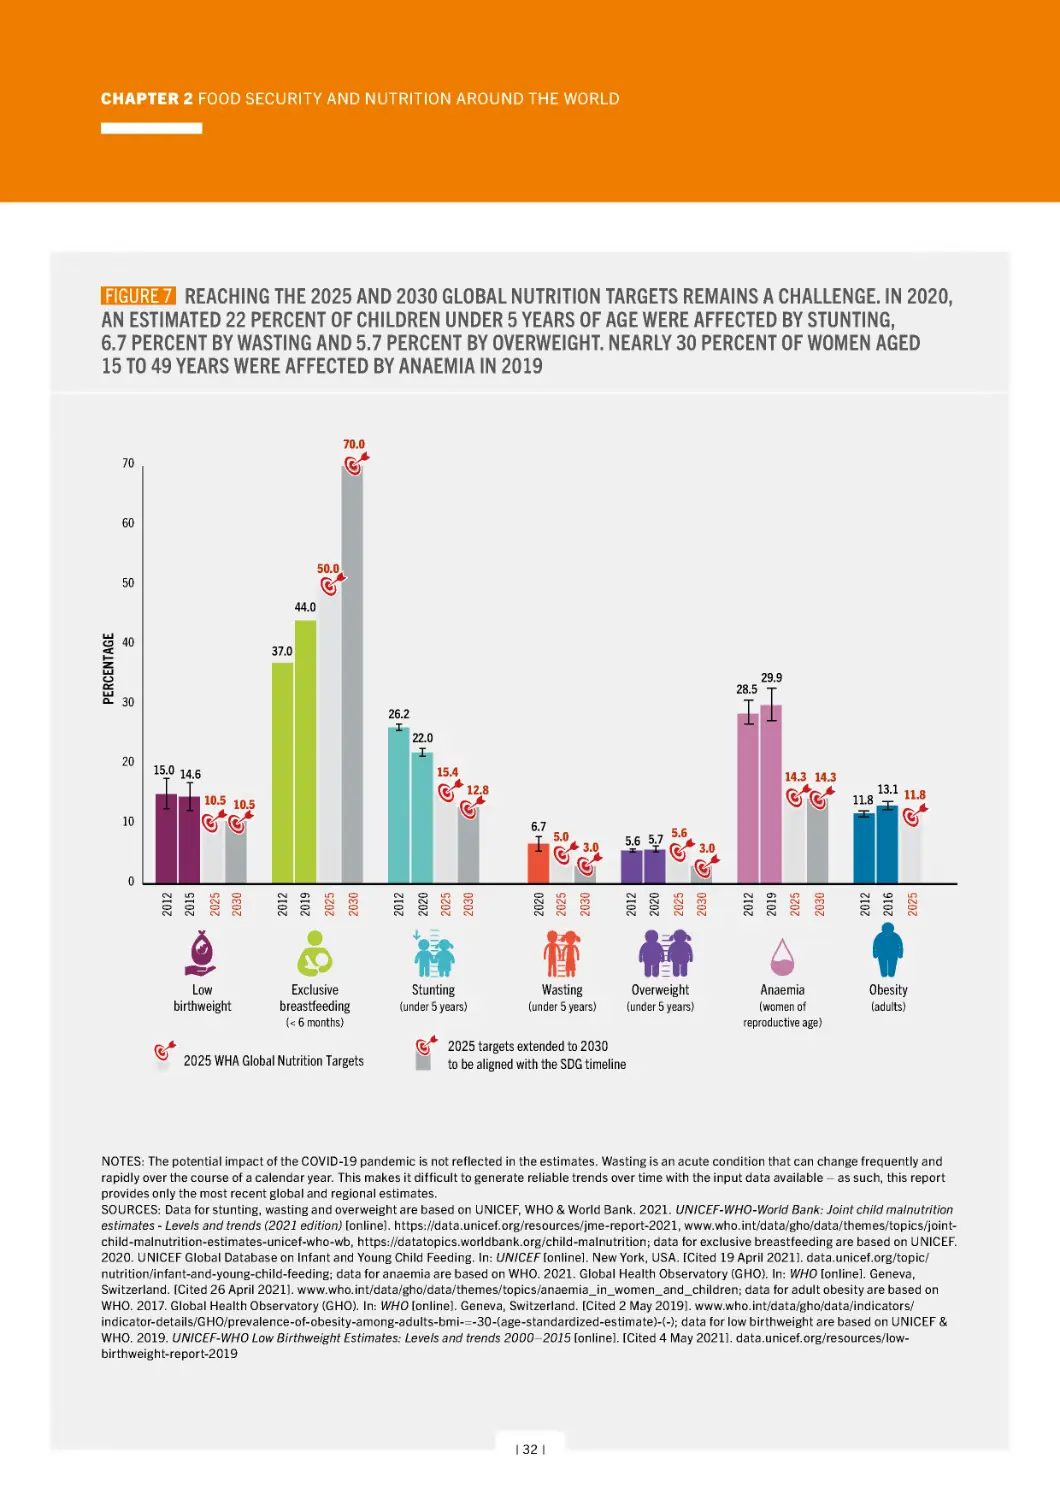 ﻿ figure 7   Reaching the 2025 and 2030 global nutrition targets remains a challenge. In 2020, an estimated 22 percent of children under 5 years of age were affected by stunting, 6.7 percent by wasting and 5.7 percent by overweight. Nearly 30 percent of w